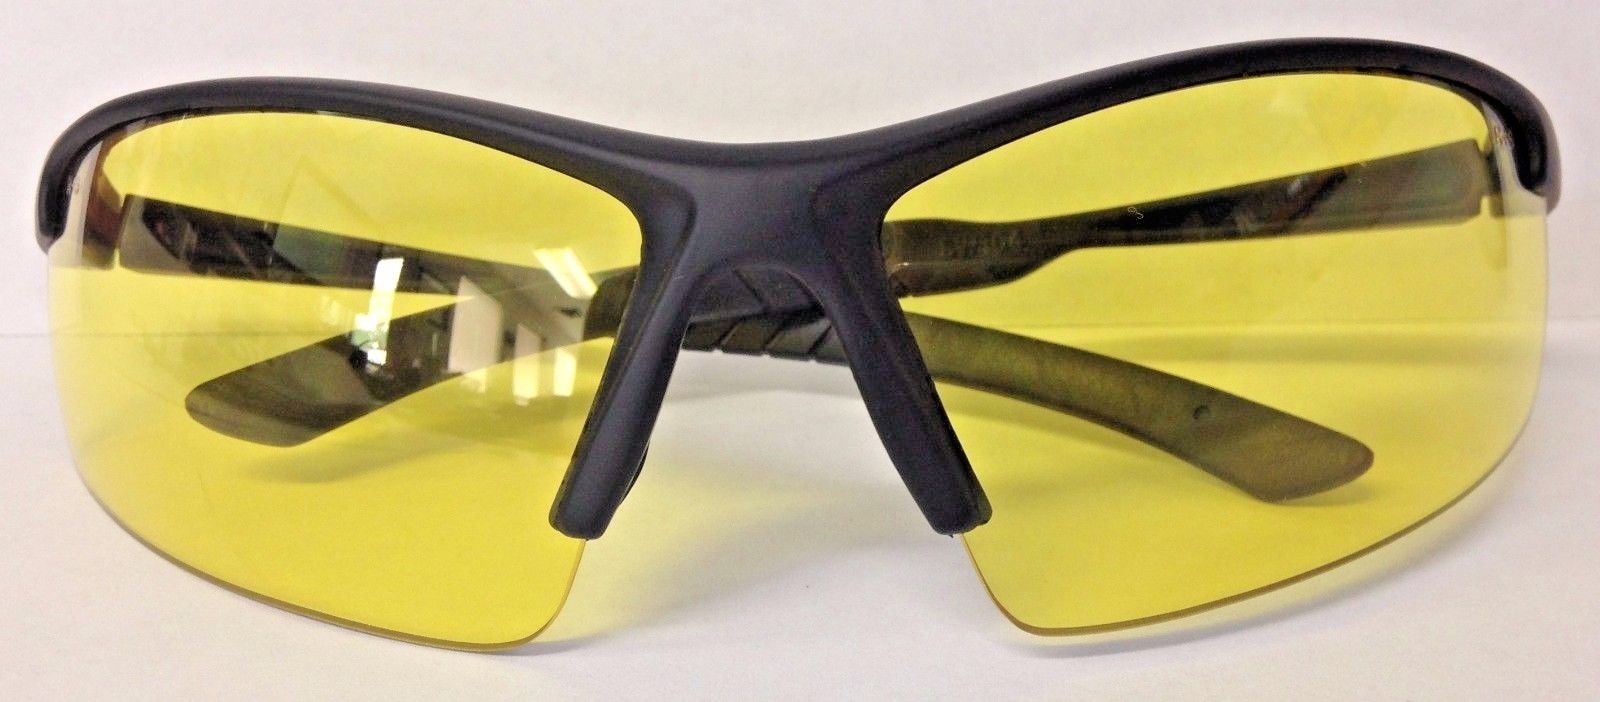 Smith-Wesson SW104-40 Performance Eyewear Safety Glasses Amber Lens